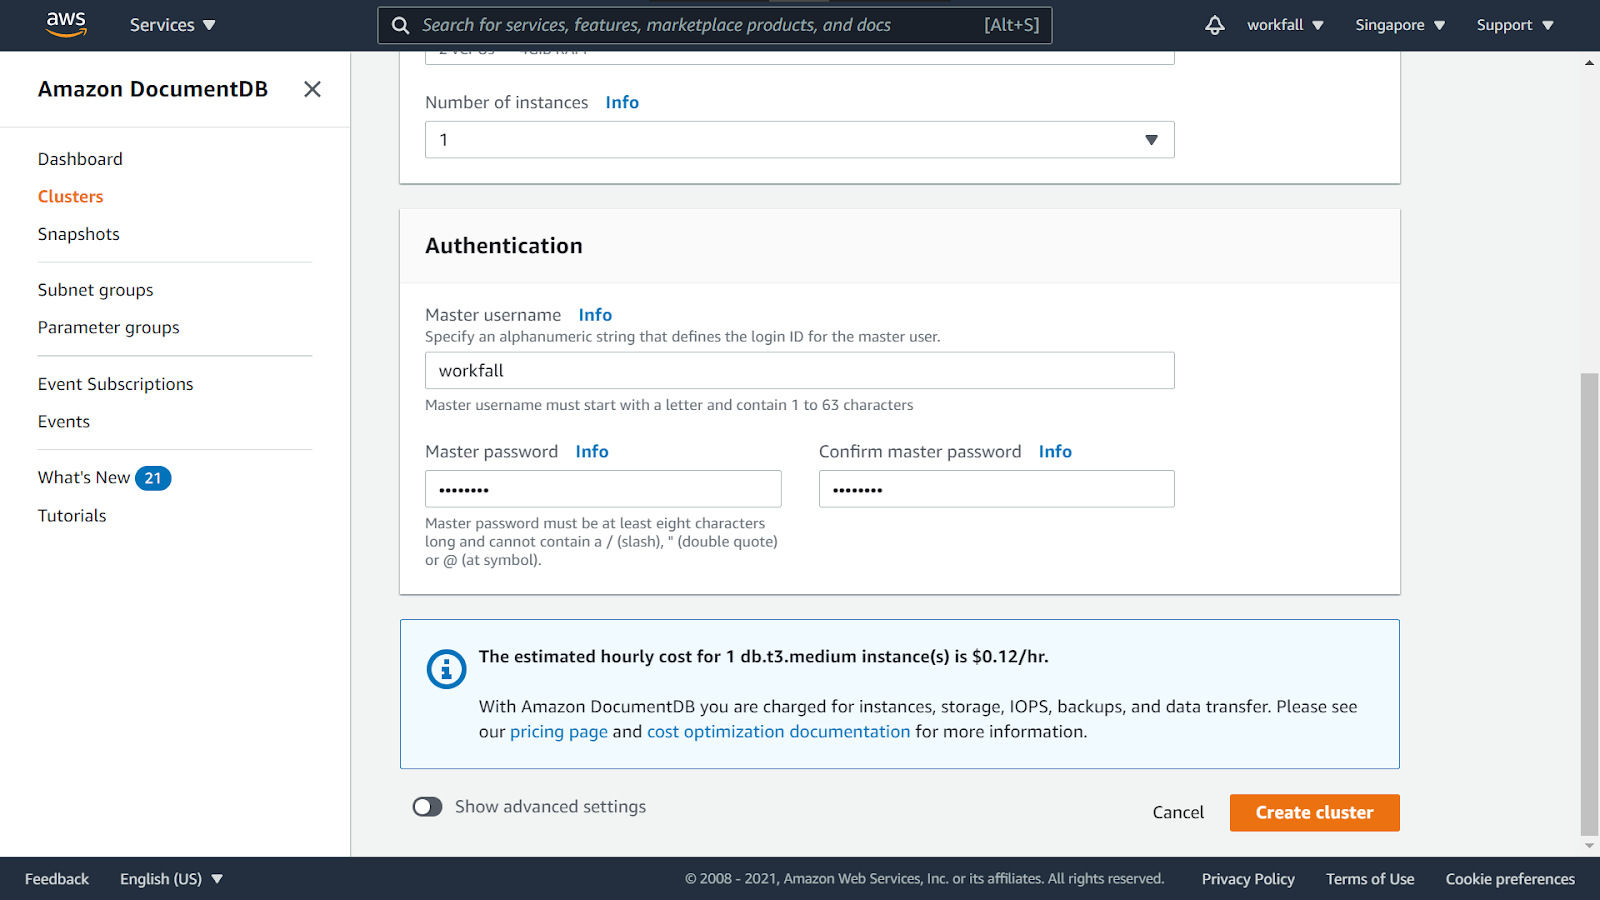 How to set up a Document Database with Amazon DocumentDB (with MongoDB compatibility) and AWS Cloud9 in a private VPC?